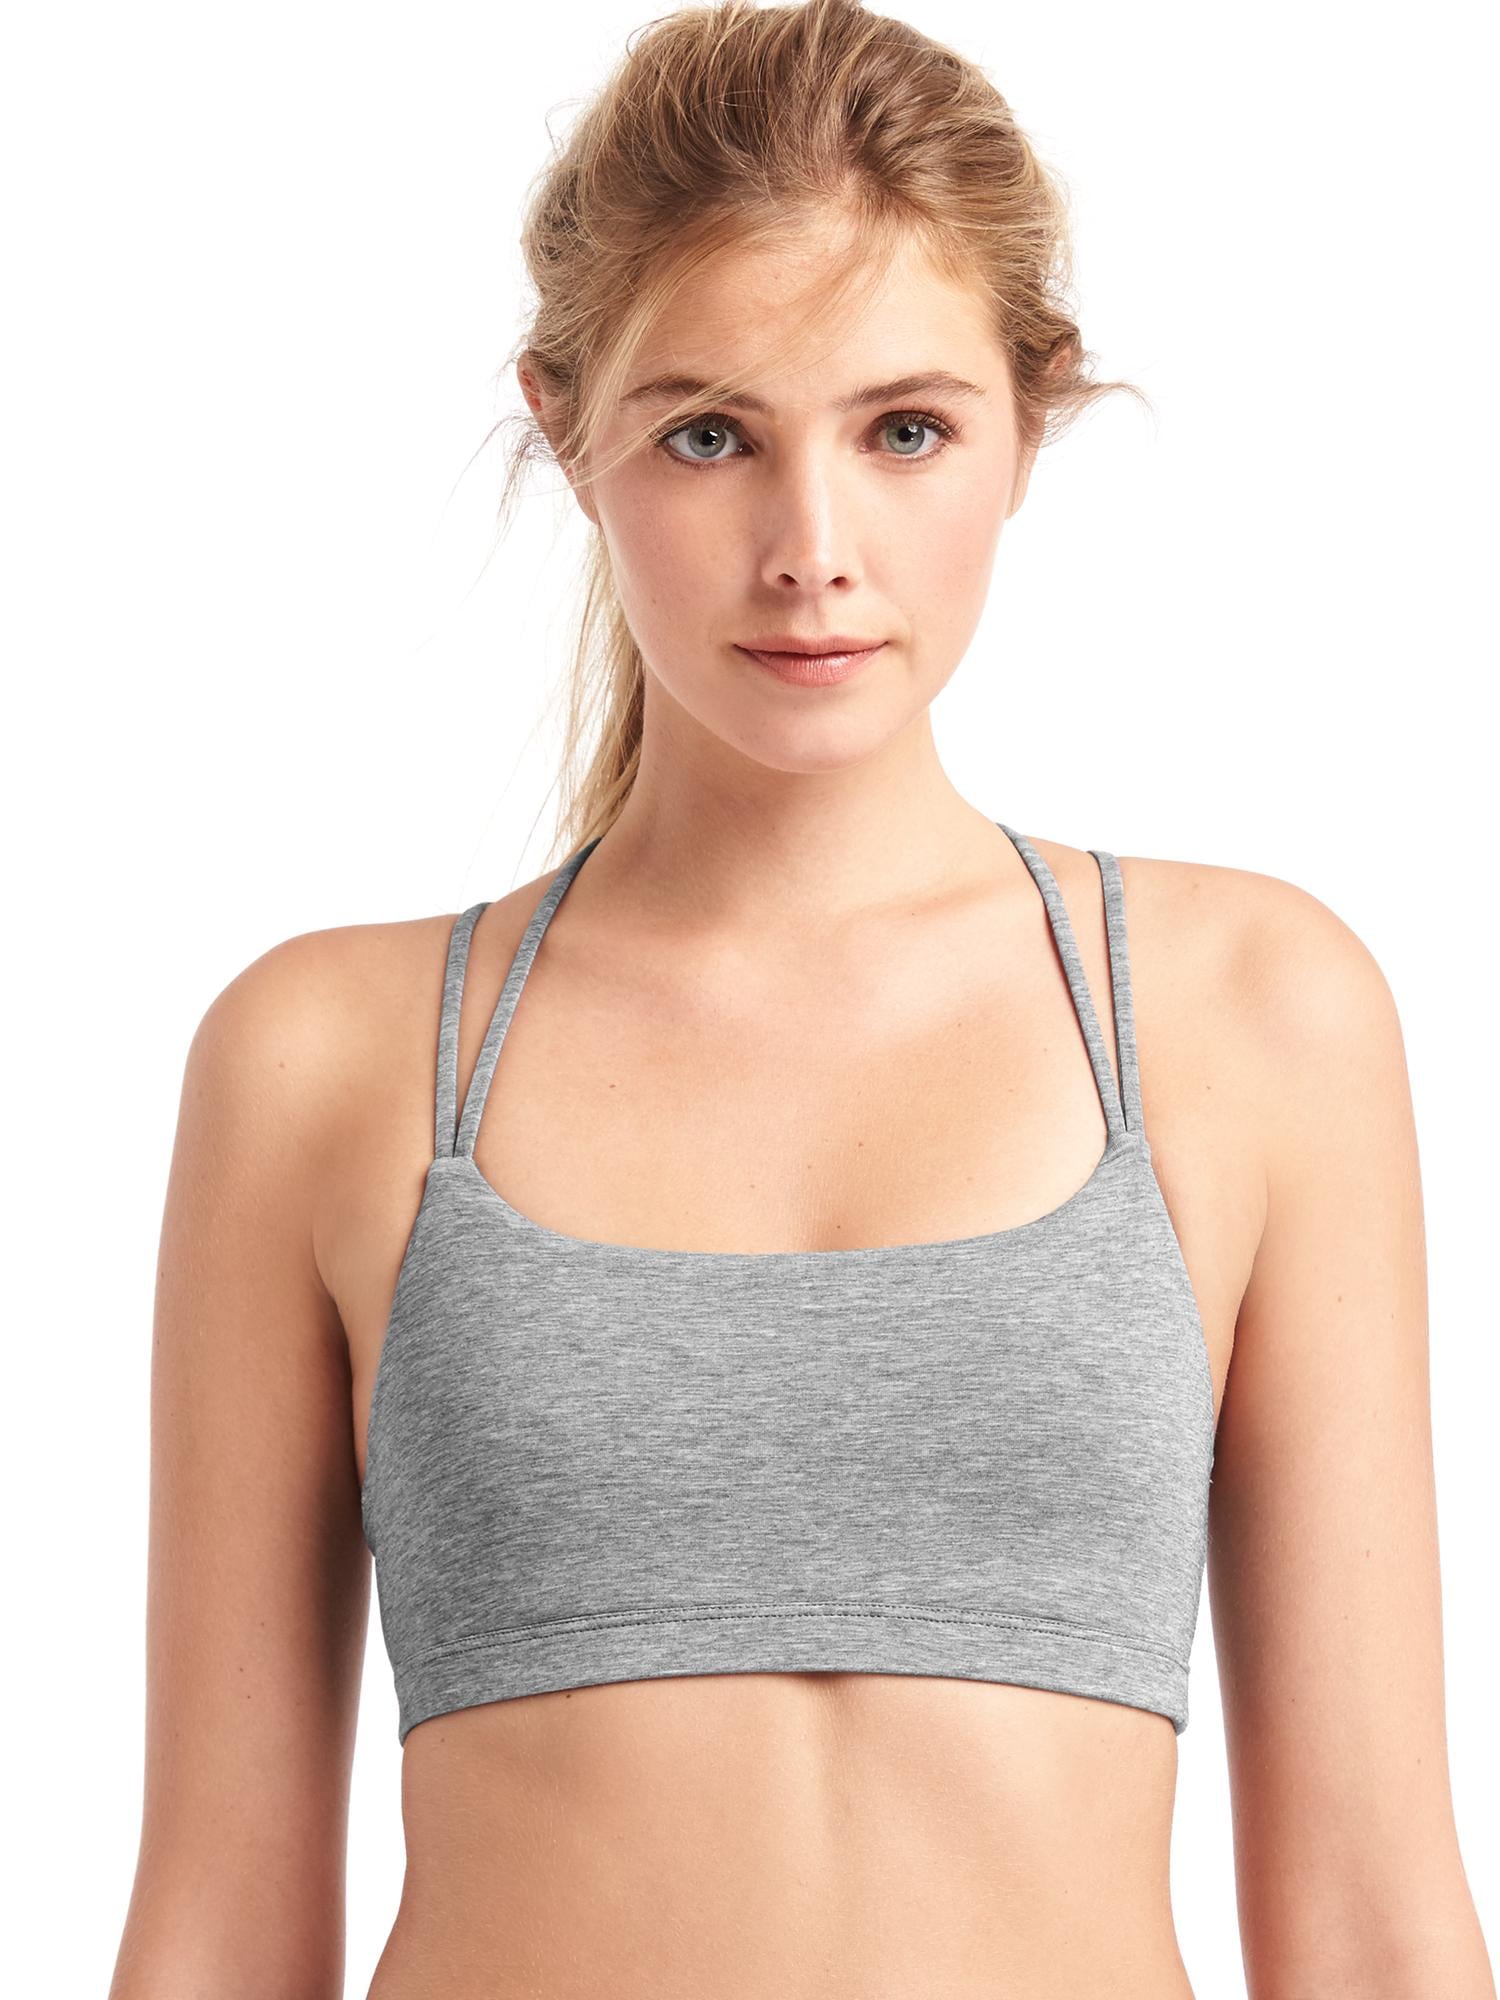 Gap Fit Breathe Low Support Unpadded Wicking Go Dry NWT Sports Bra Size  Small